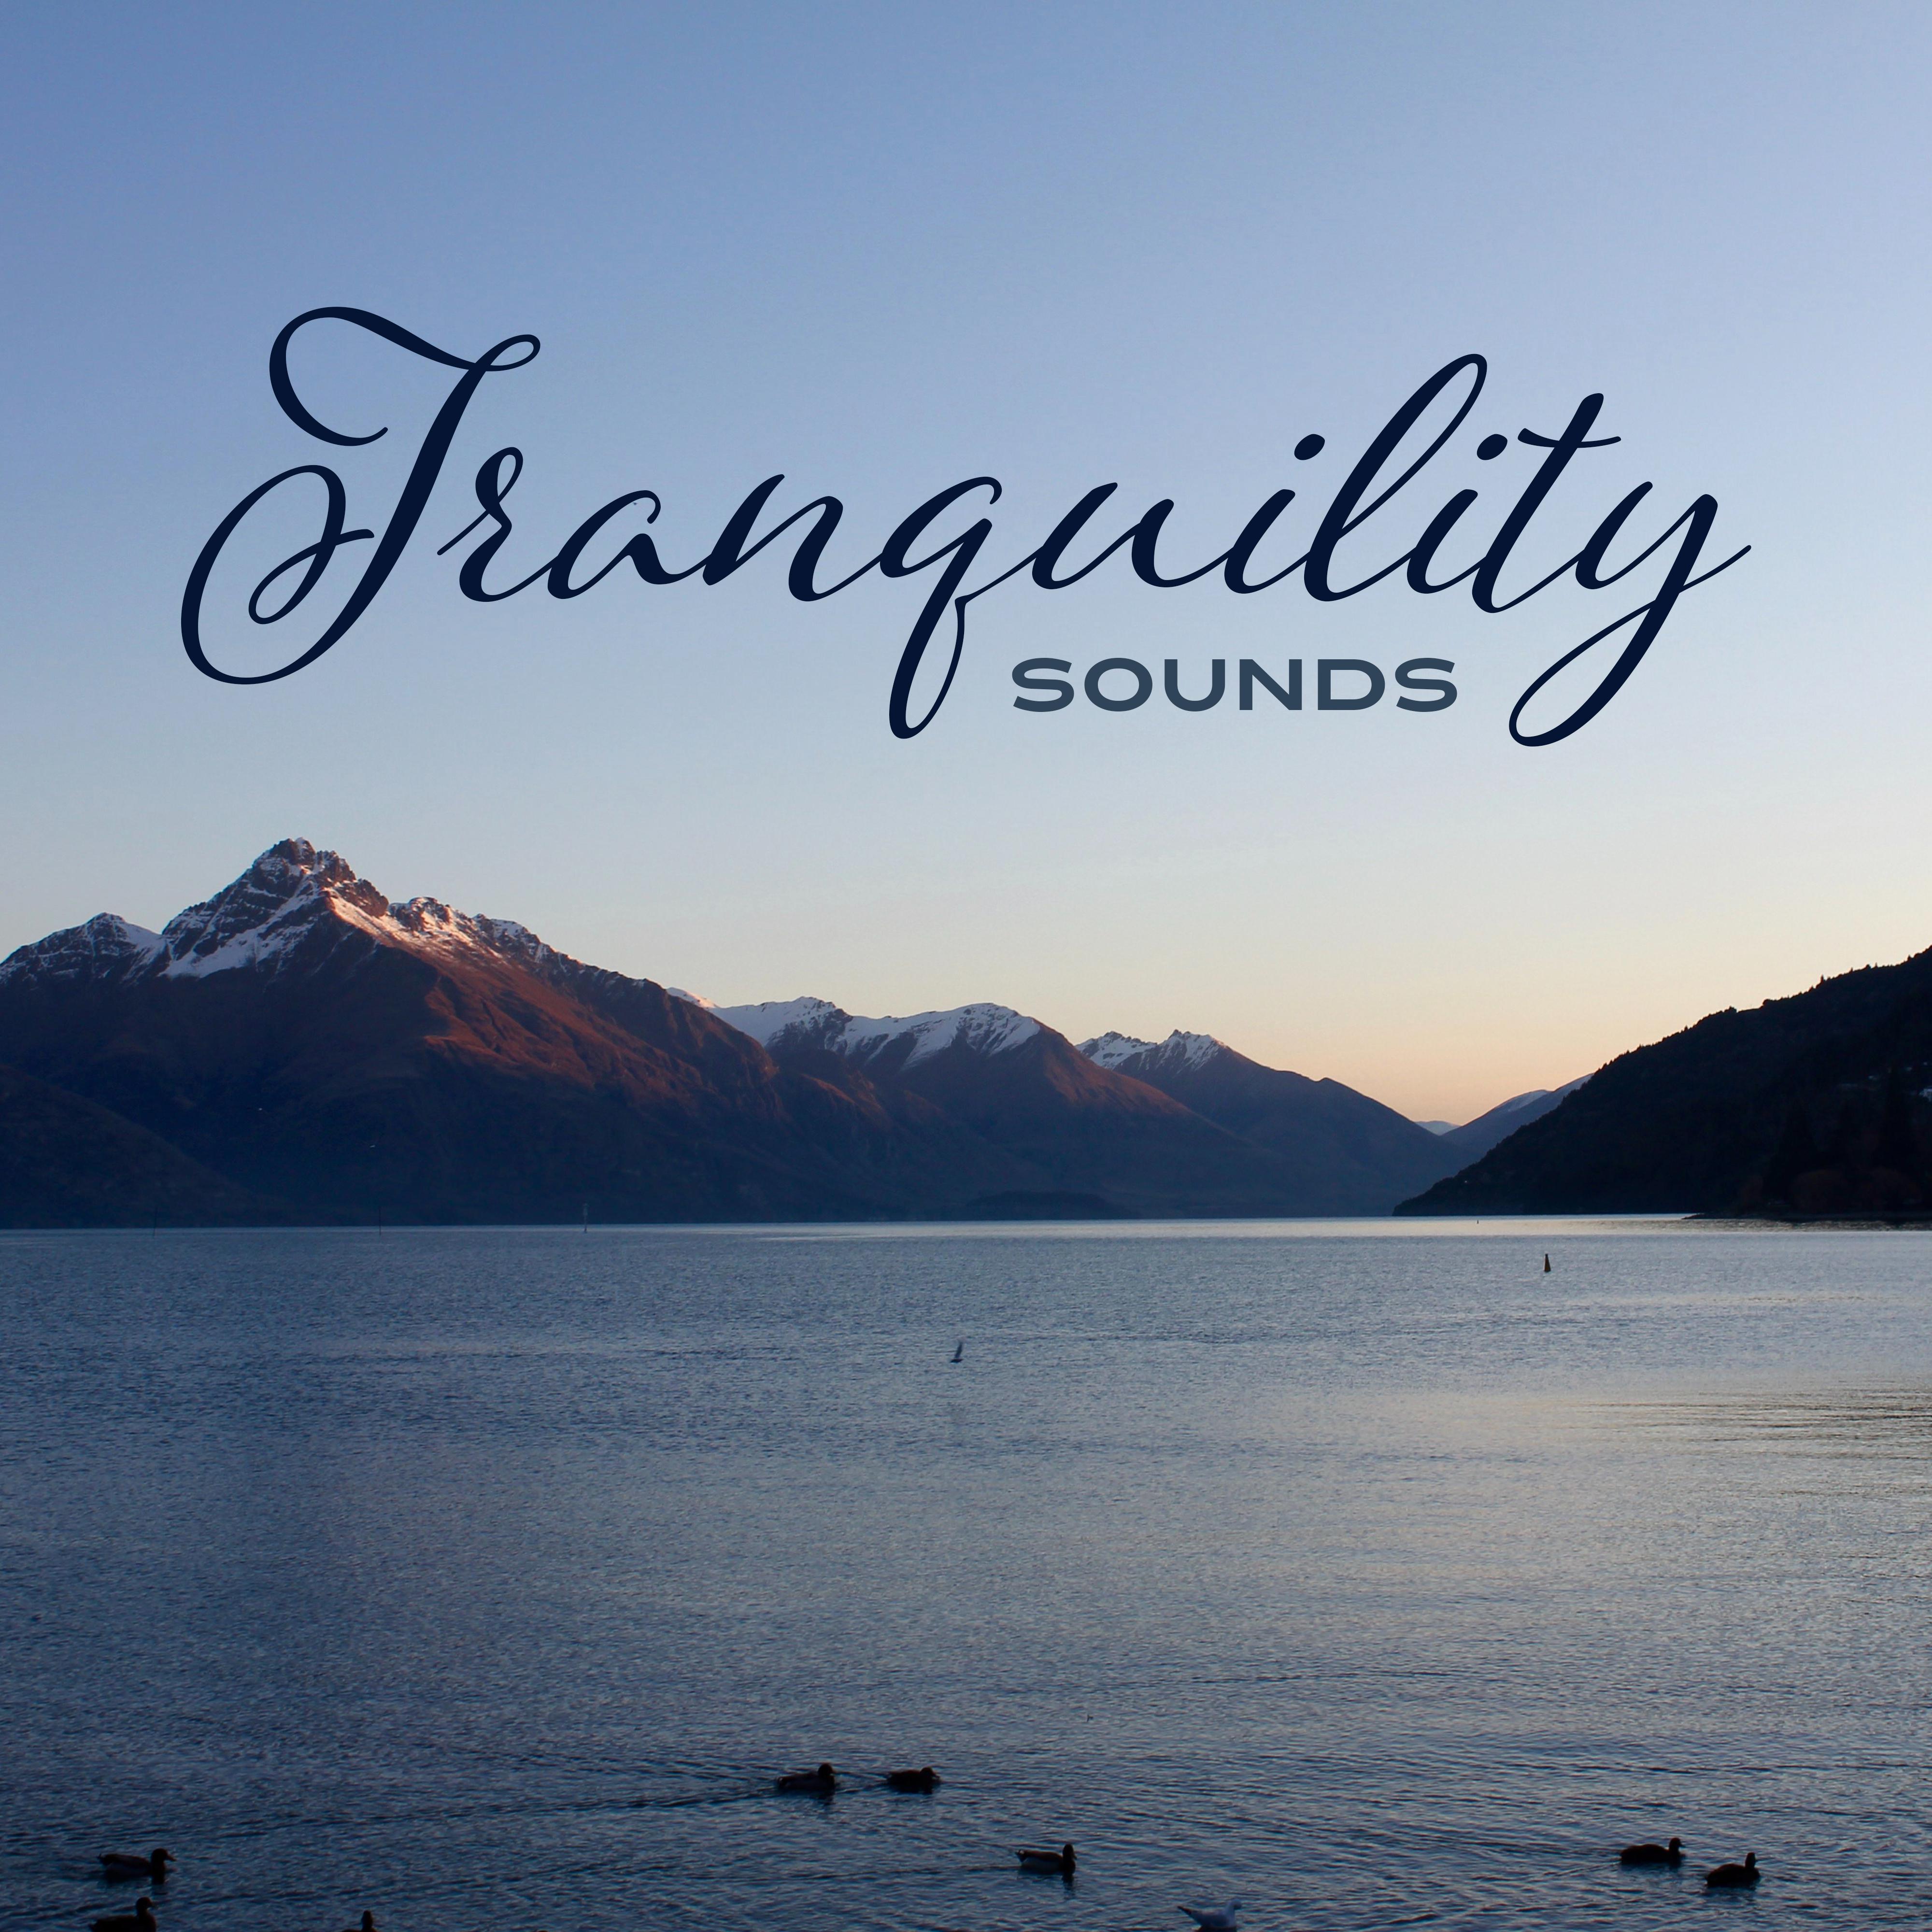 Tranquility Sounds – Perfect Relaxation, Healing Music to Rest, Anti Stress Music, Meditate